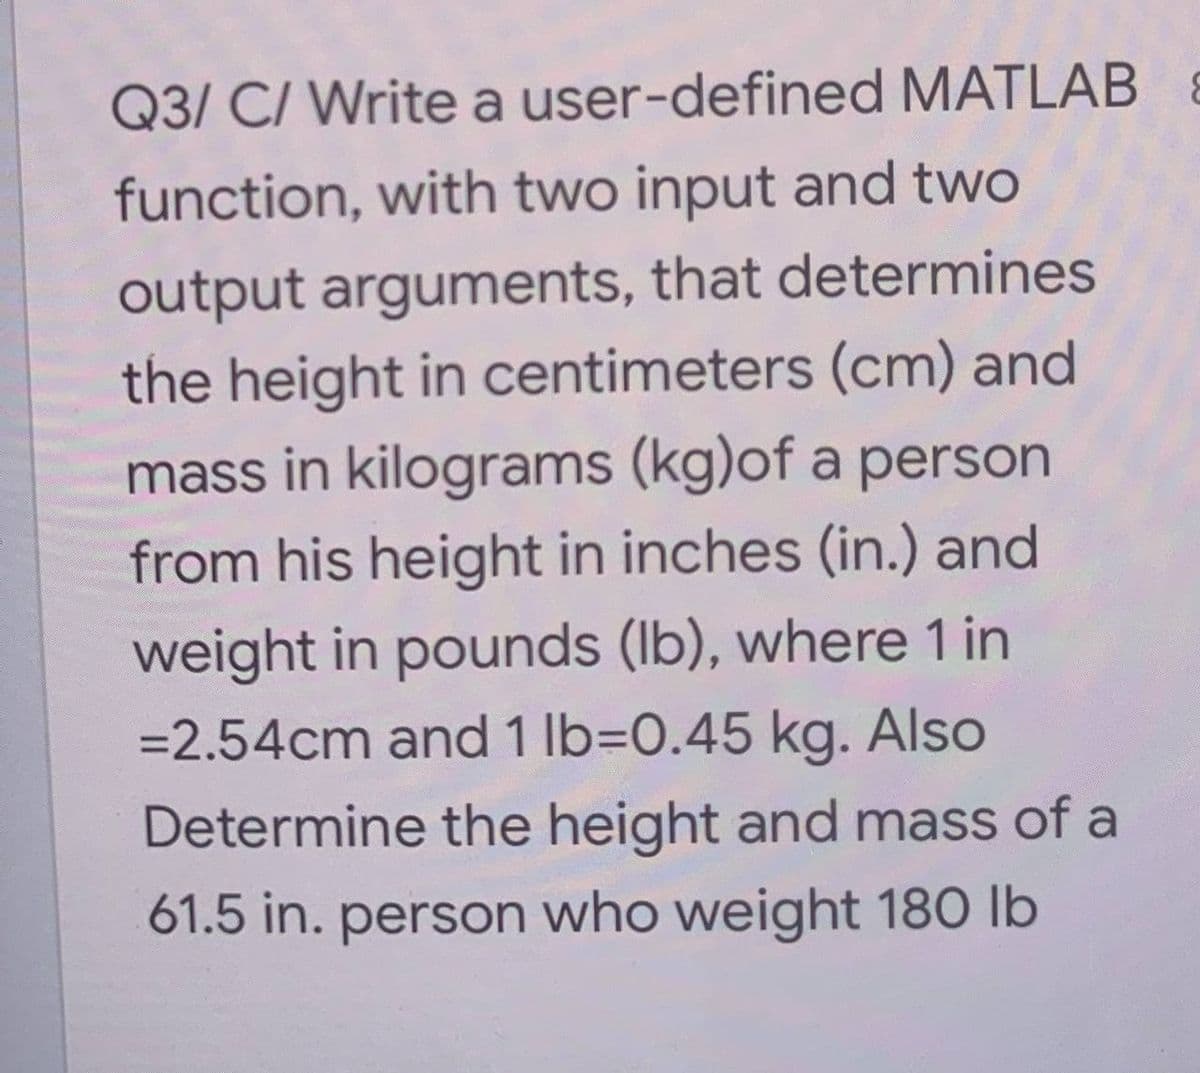 Q3/ C/ Write a user-defined MATLAB &
function, with two input and two
output arguments, that determines
the height in centimeters (cm) and
mass in kilograms (kg)of a person
from his height in inches (in.) and
weight in pounds (lb), where 1 in
= 2.54cm and 1 lb=0.45 kg. Also
Determine the height and mass of a
61.5 in. person who weight 180 lb